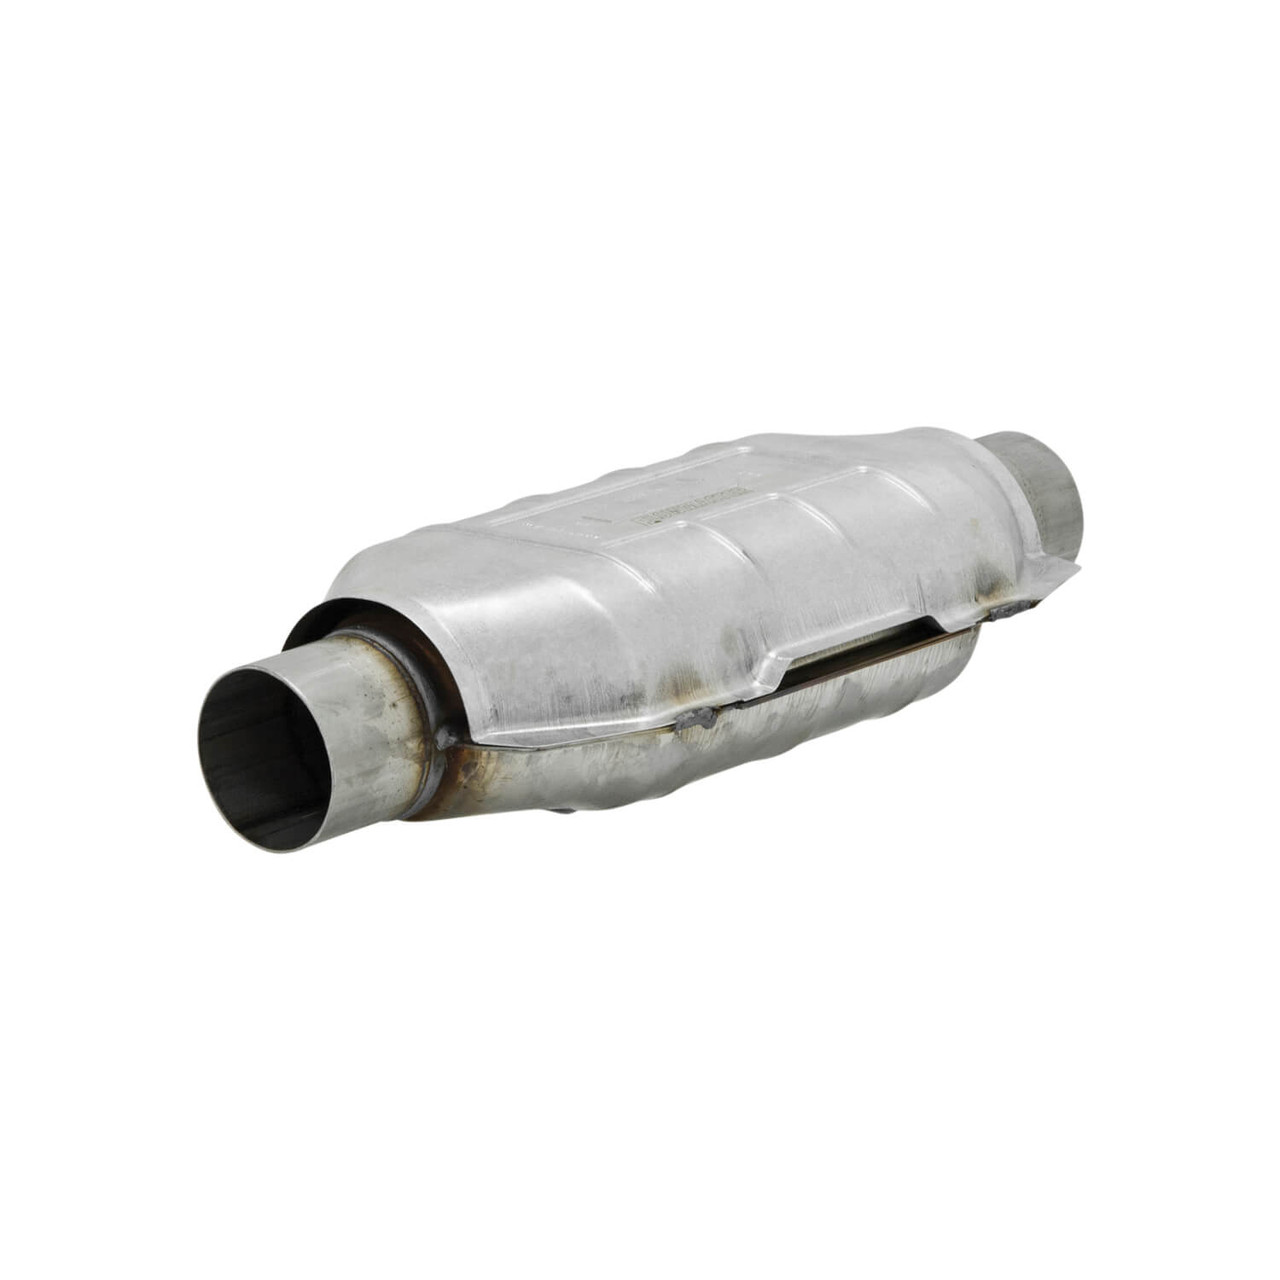 Flowmaster 2400224 240 Series 2.25 Inlet/Outlet Universal Catalytic Converter 